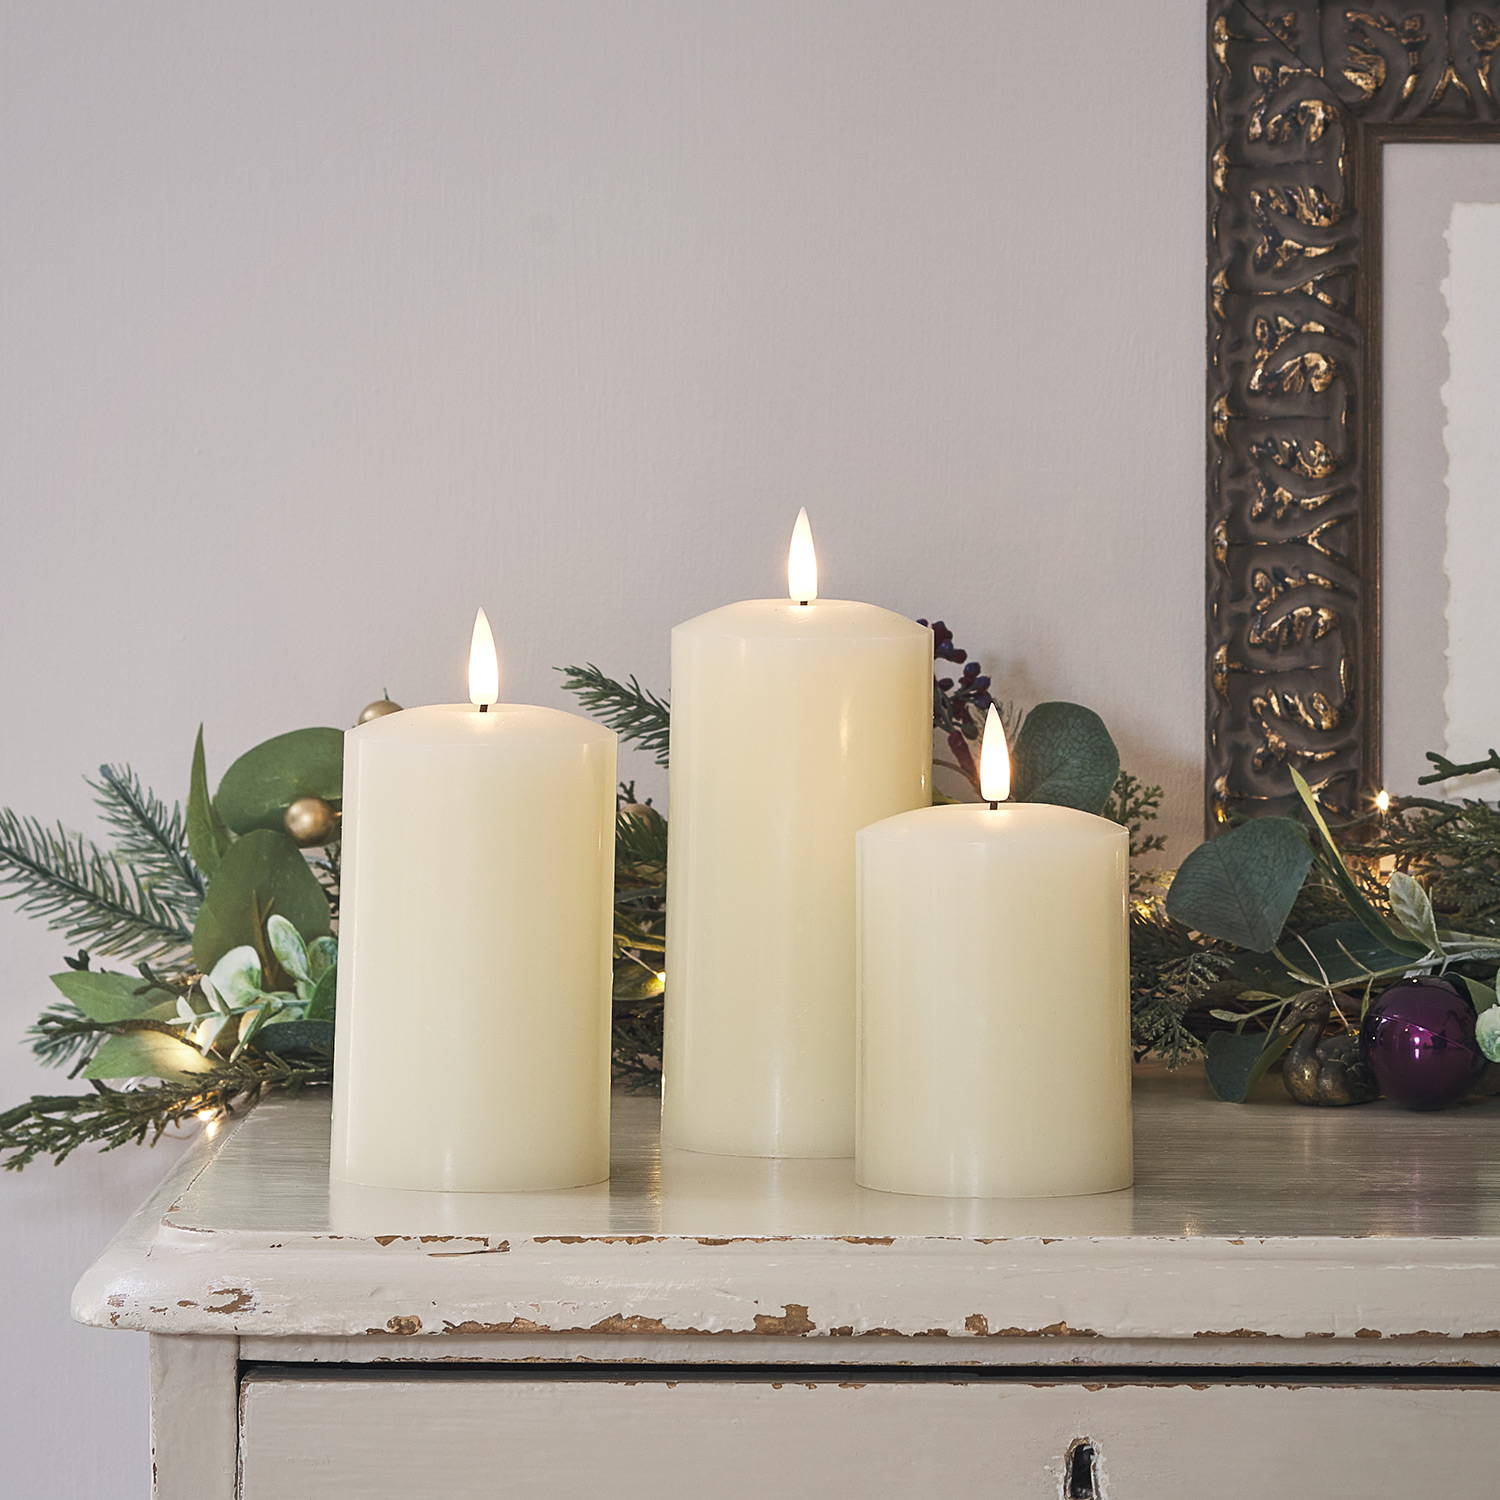 3 ivory TruGlow LED candles on a sidetable with a Christmas garland in the background.